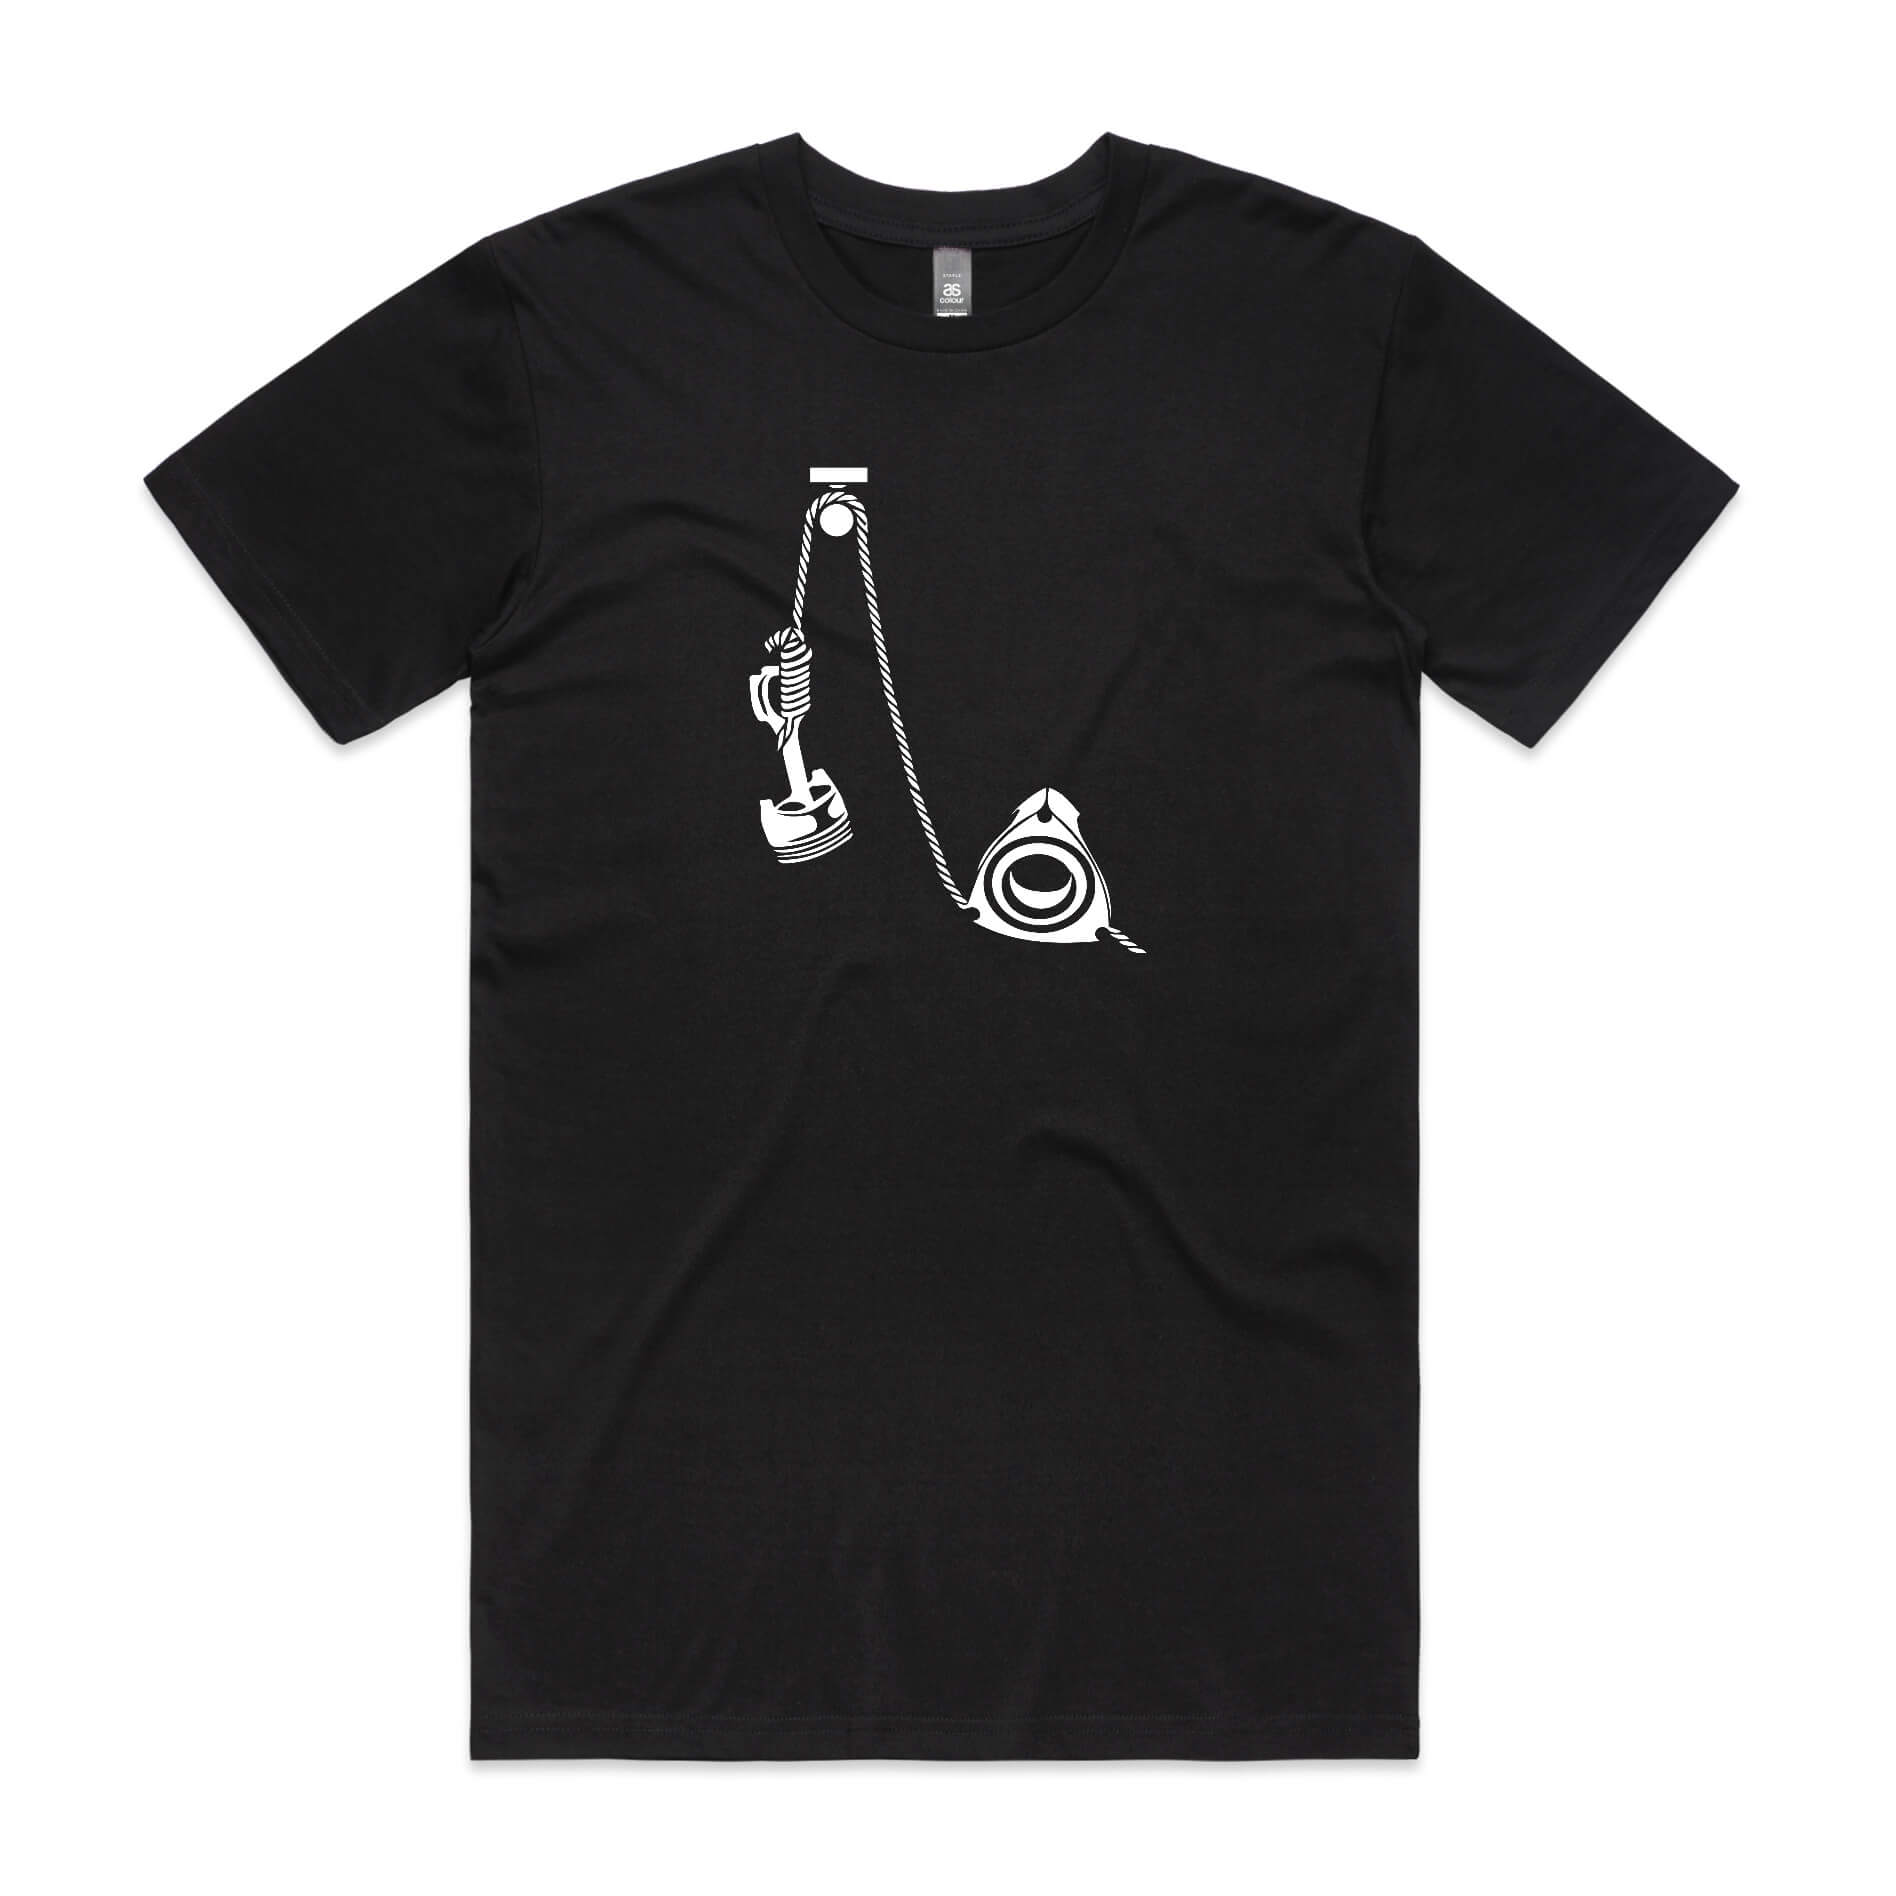 Rotary hangs piston t-shirt in black featuring a white cartoon of a rotary holding a piston in a noose